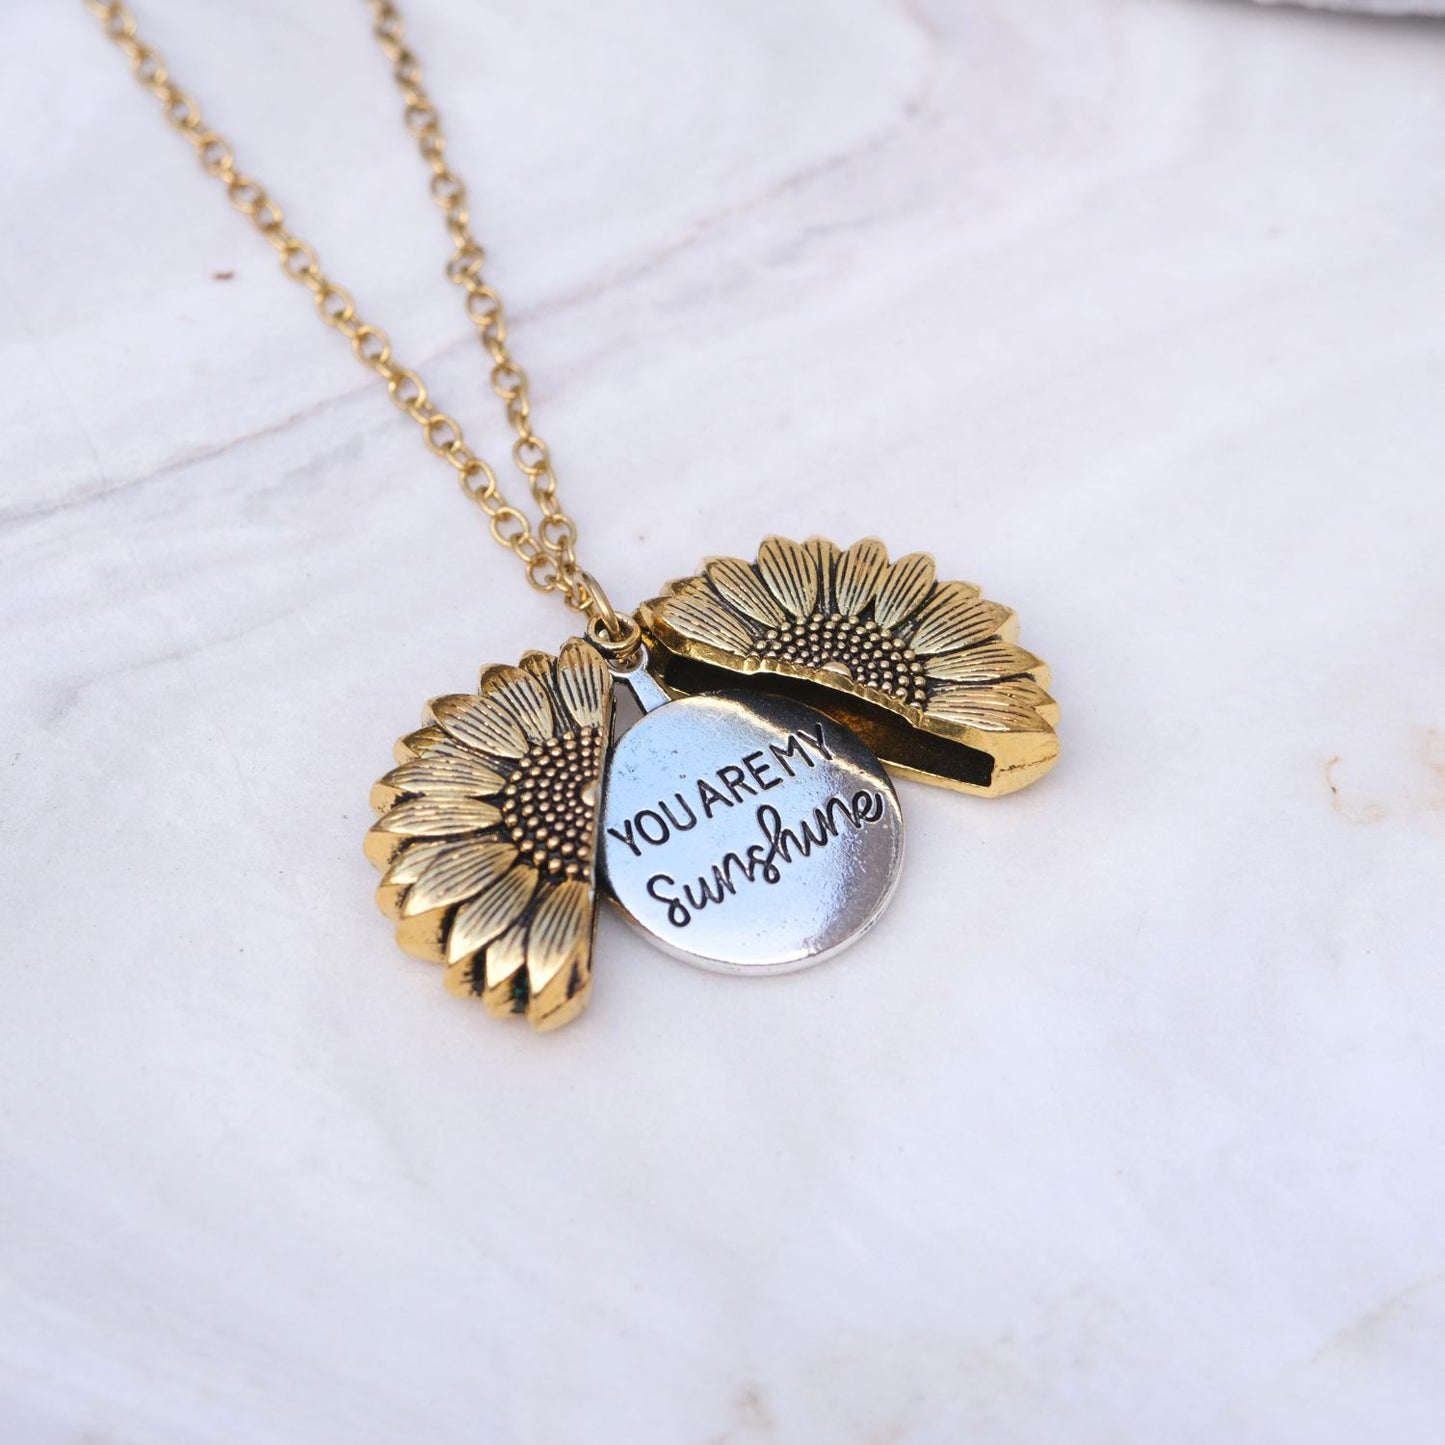 "You Are My Sunshine" Necklace - To My Sunshine